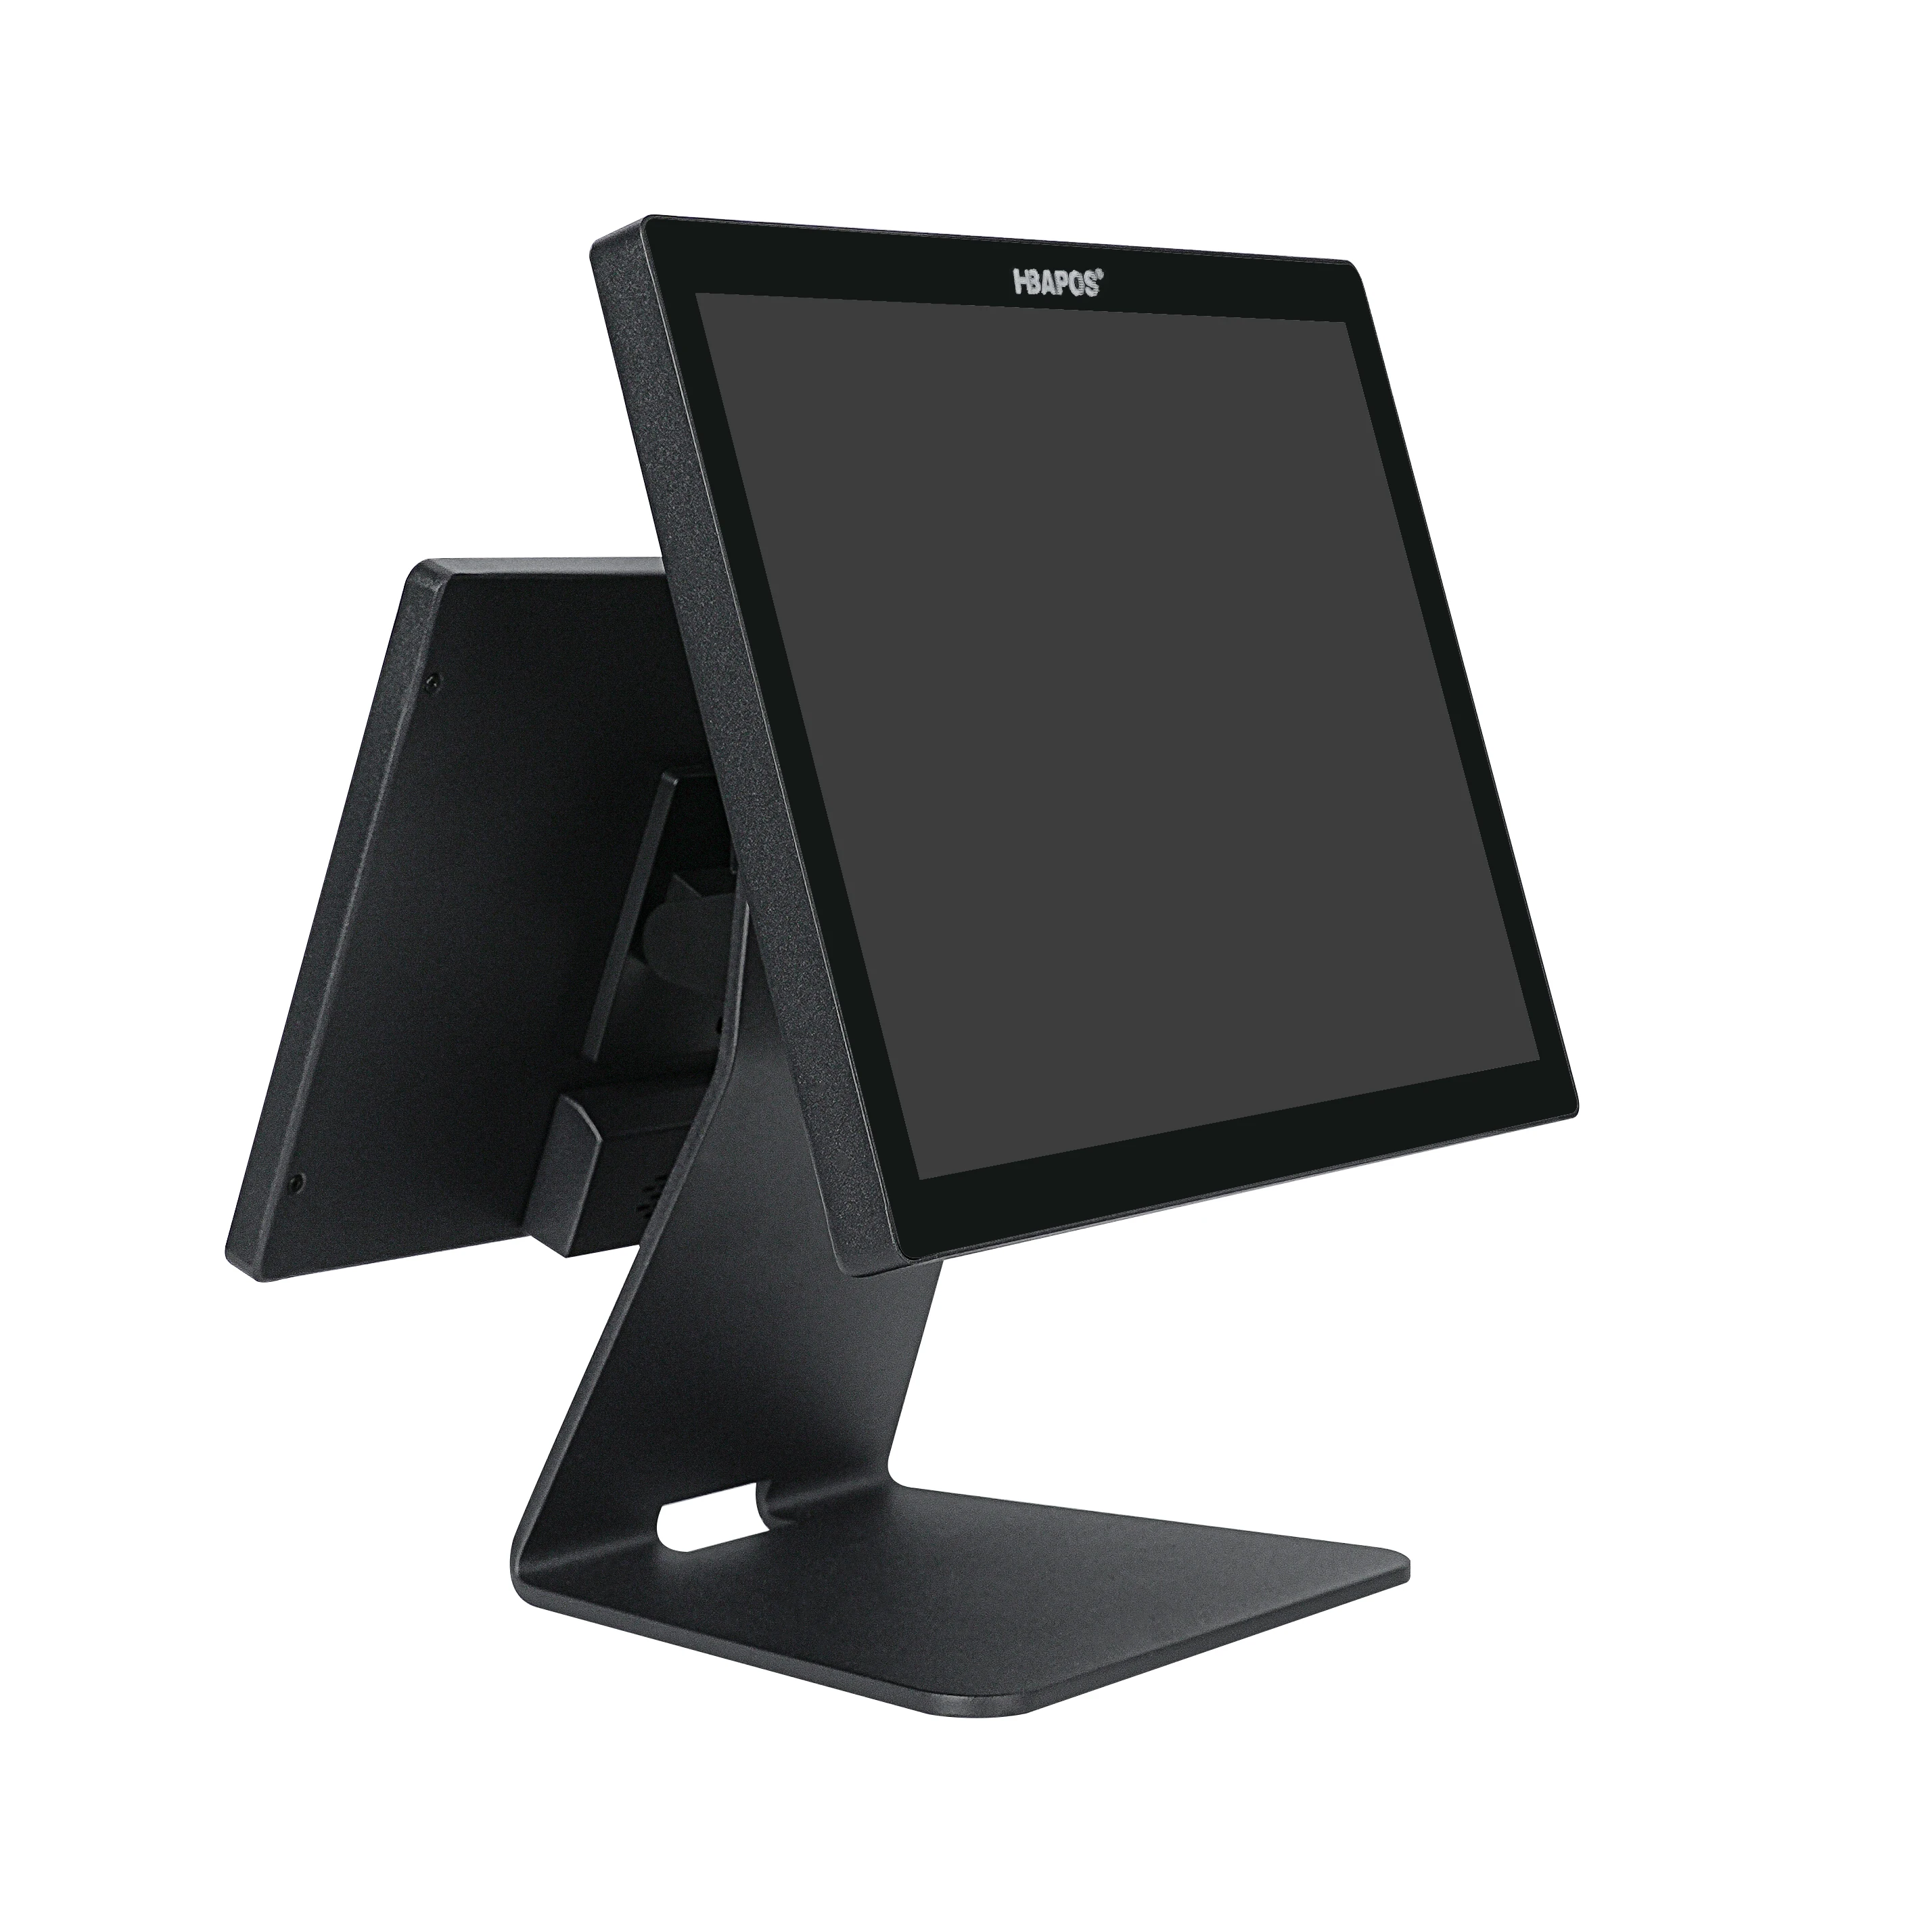 China Manufacturer Pos Terminal 15.6' Dual Screen Point Of Sale  With 13.3' Display Screen Pos Hardware